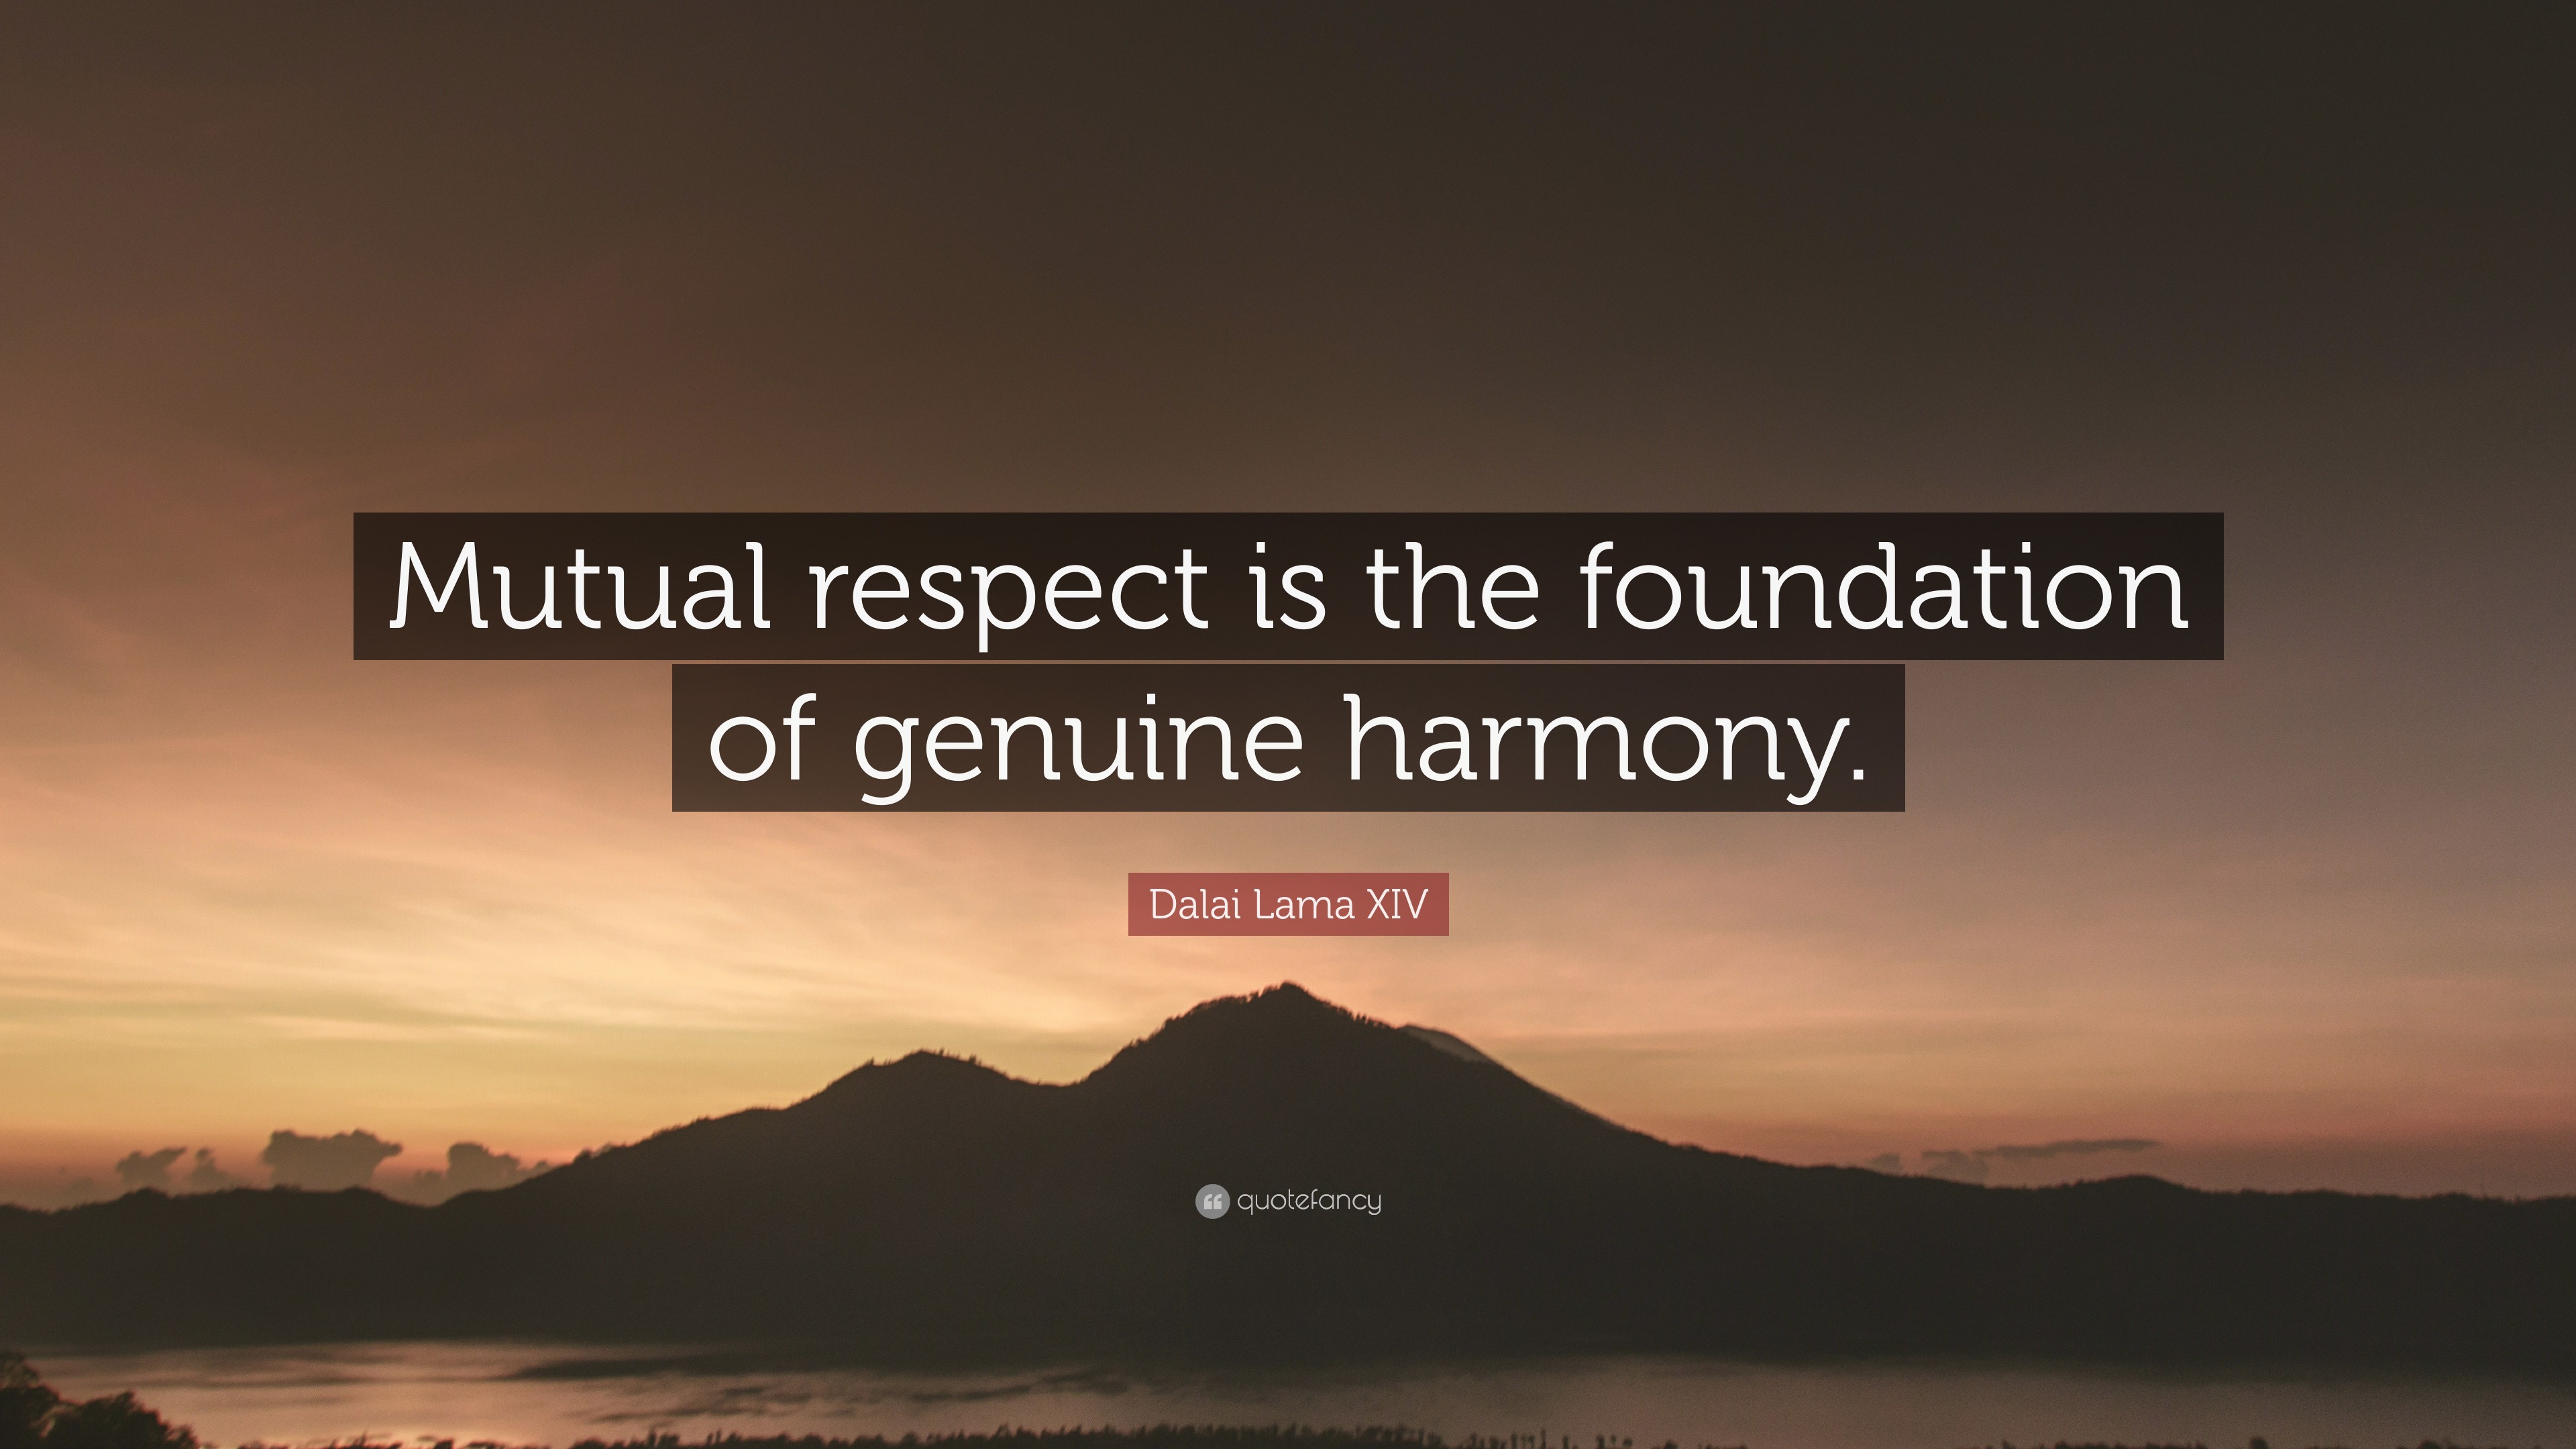 Dalai Lama Xiv Quote Mutual Respect Is The Foundation Of